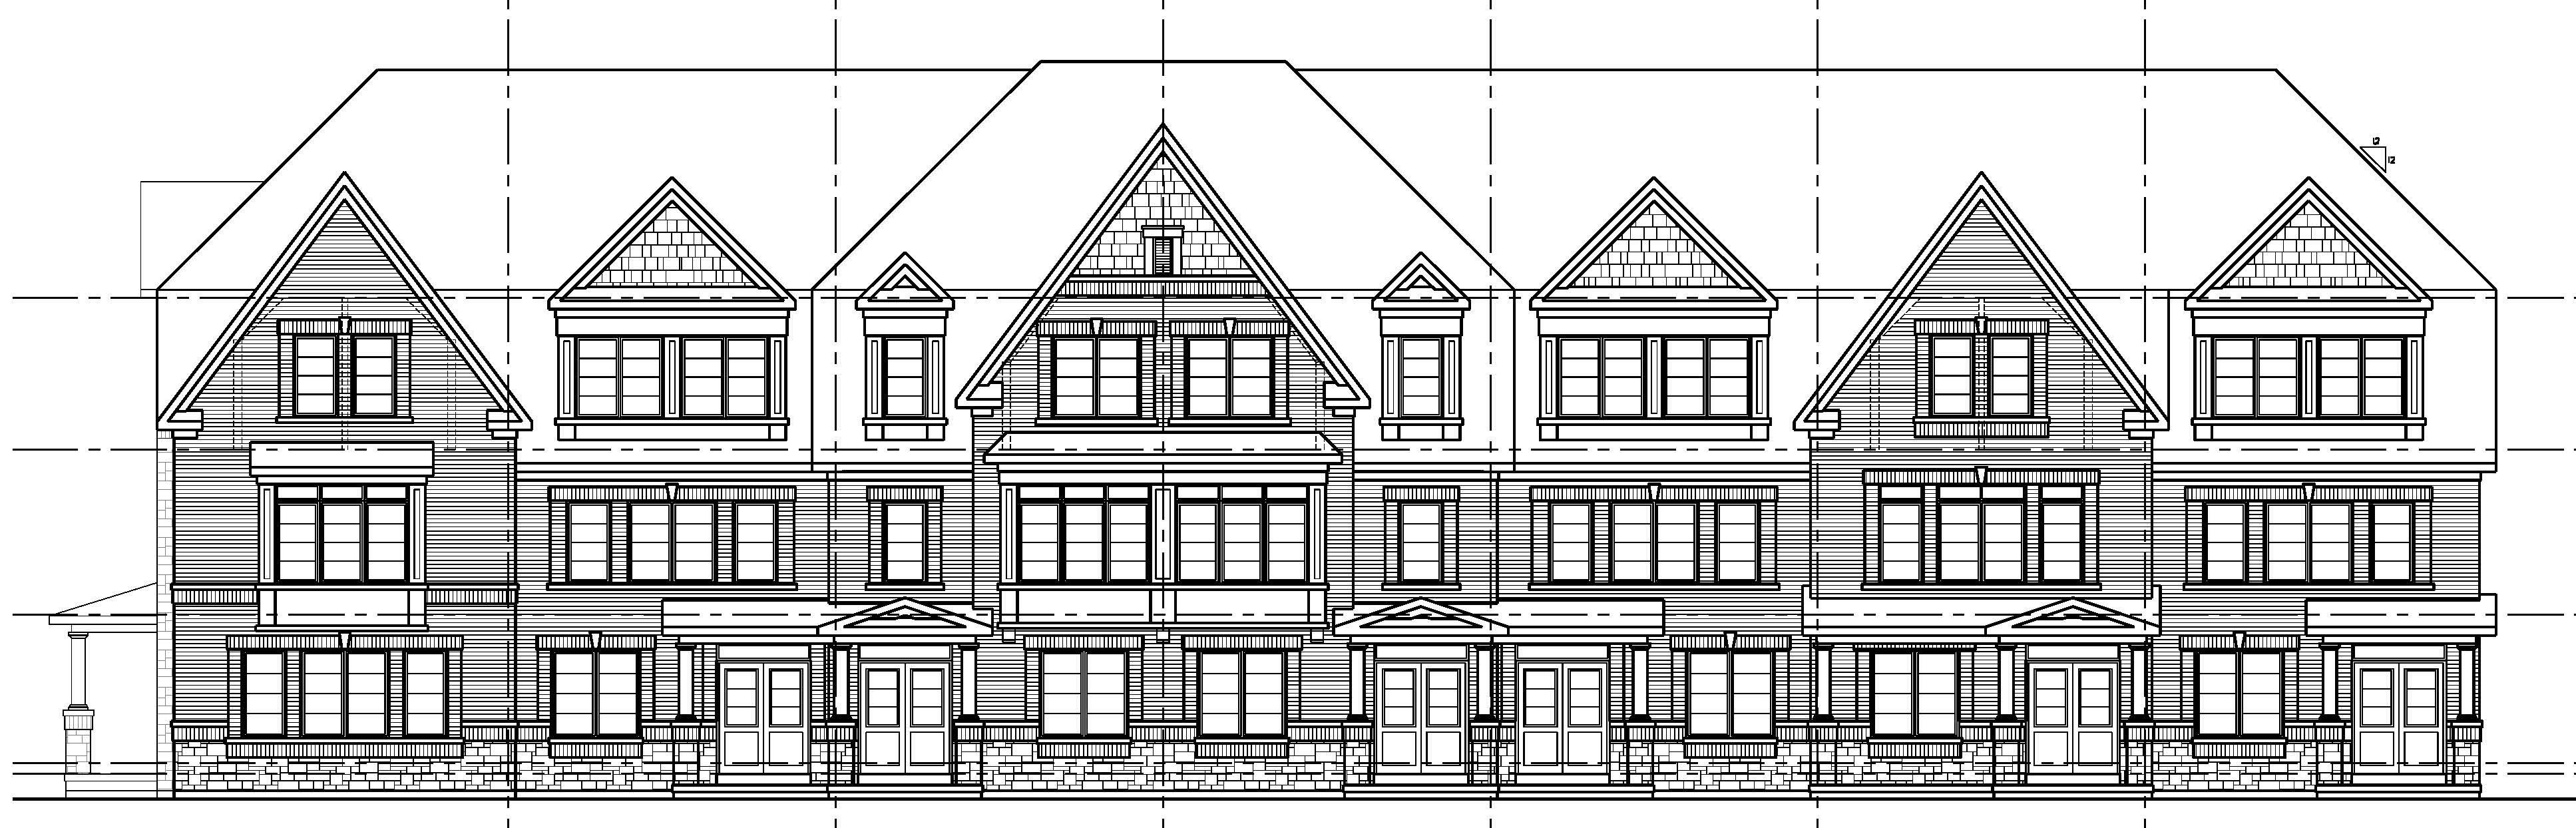 Photo of the proposed townhouse elevation